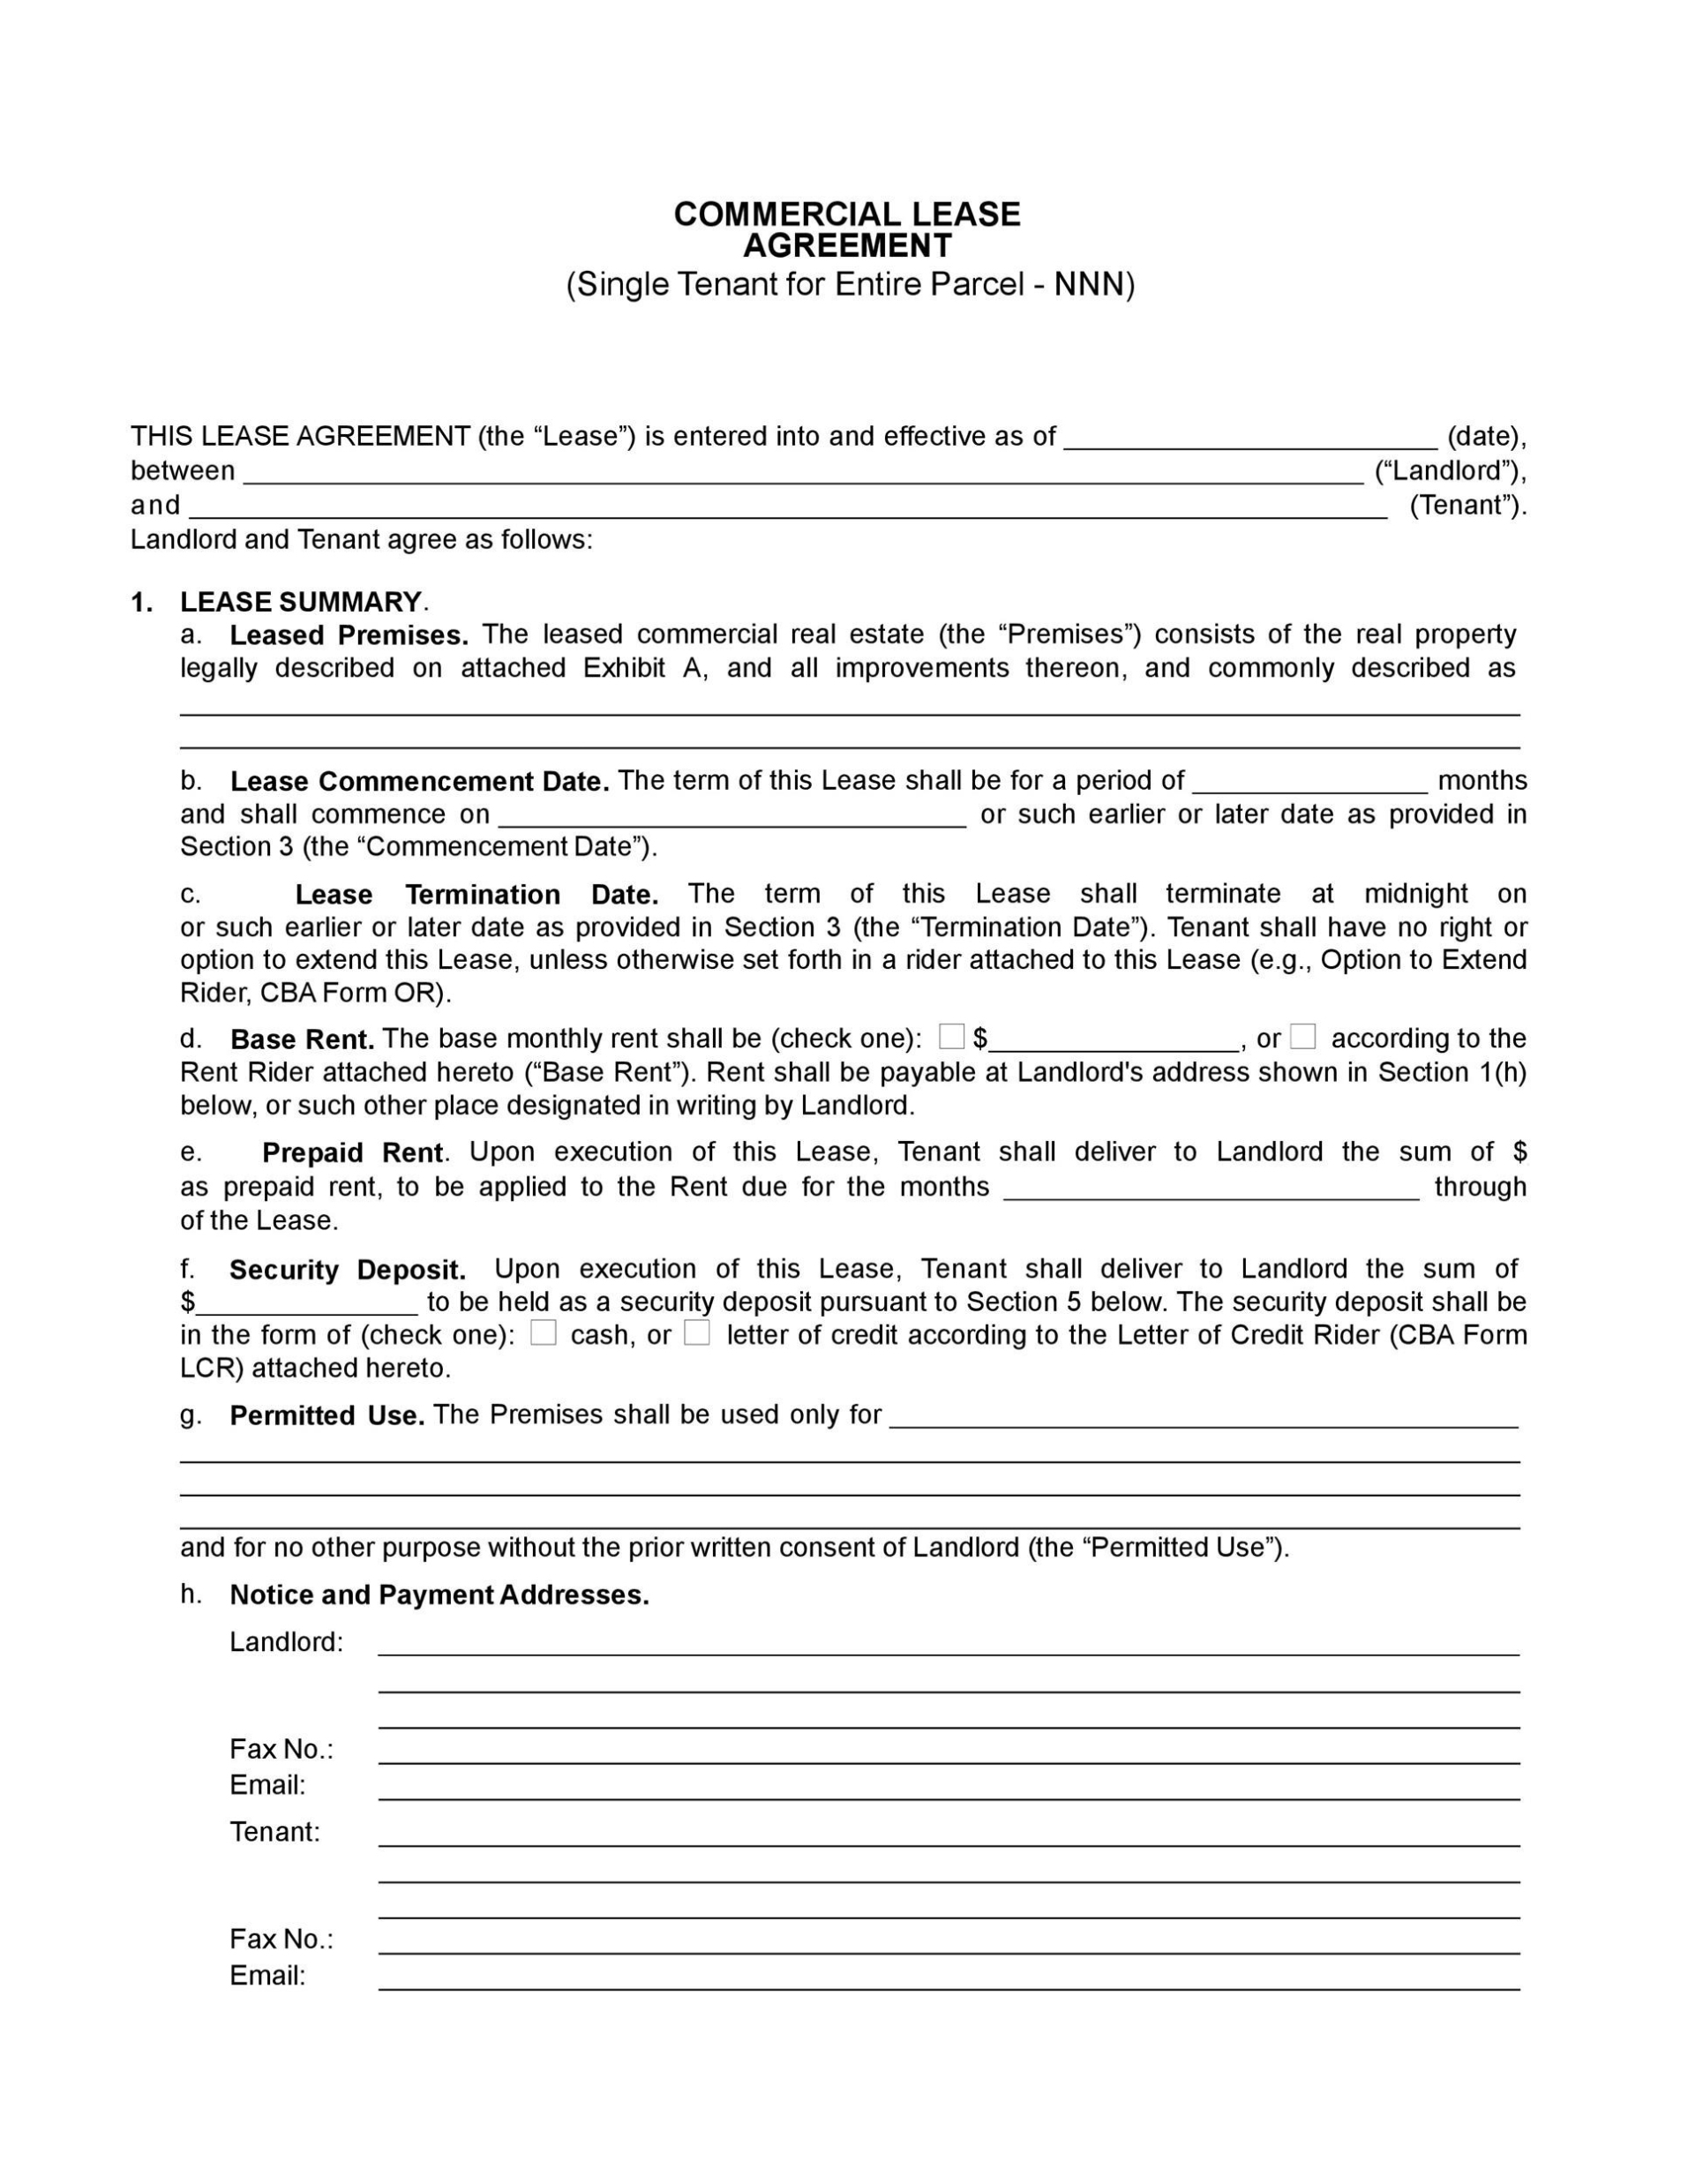 26 Free Commercial Lease Agreement Templates ᐅ Templatelab Inside Multiple Tenant Lease Agreement Template